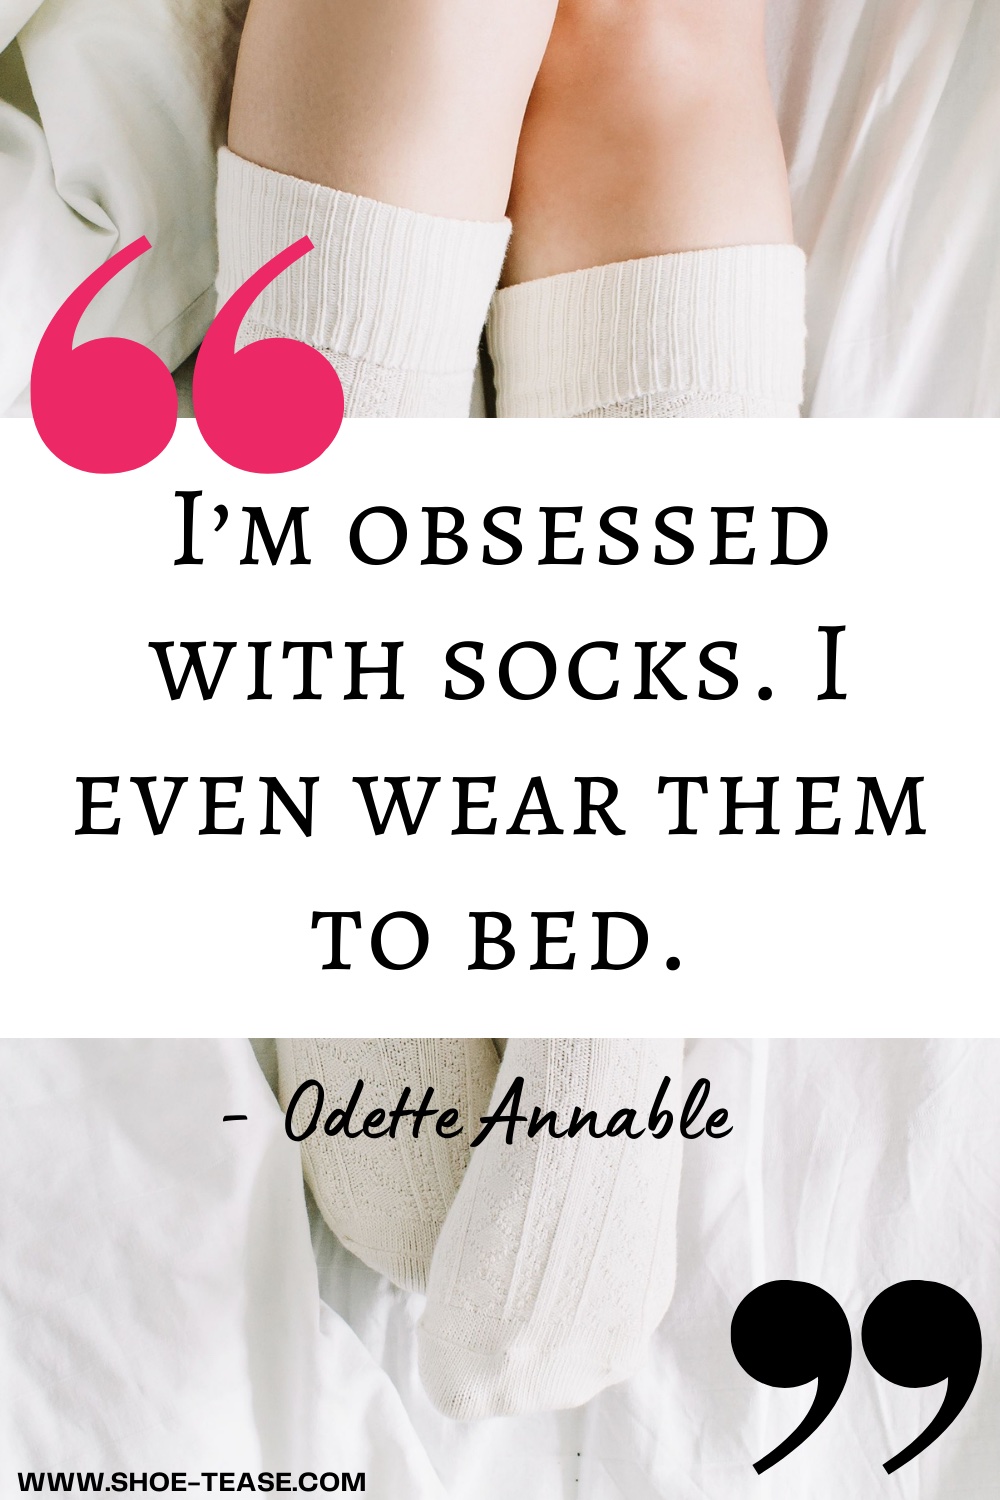 Text reading I'm obsessed with socks I even sear them to bed Odette Annable over image of woman's feet in white socks on bed.